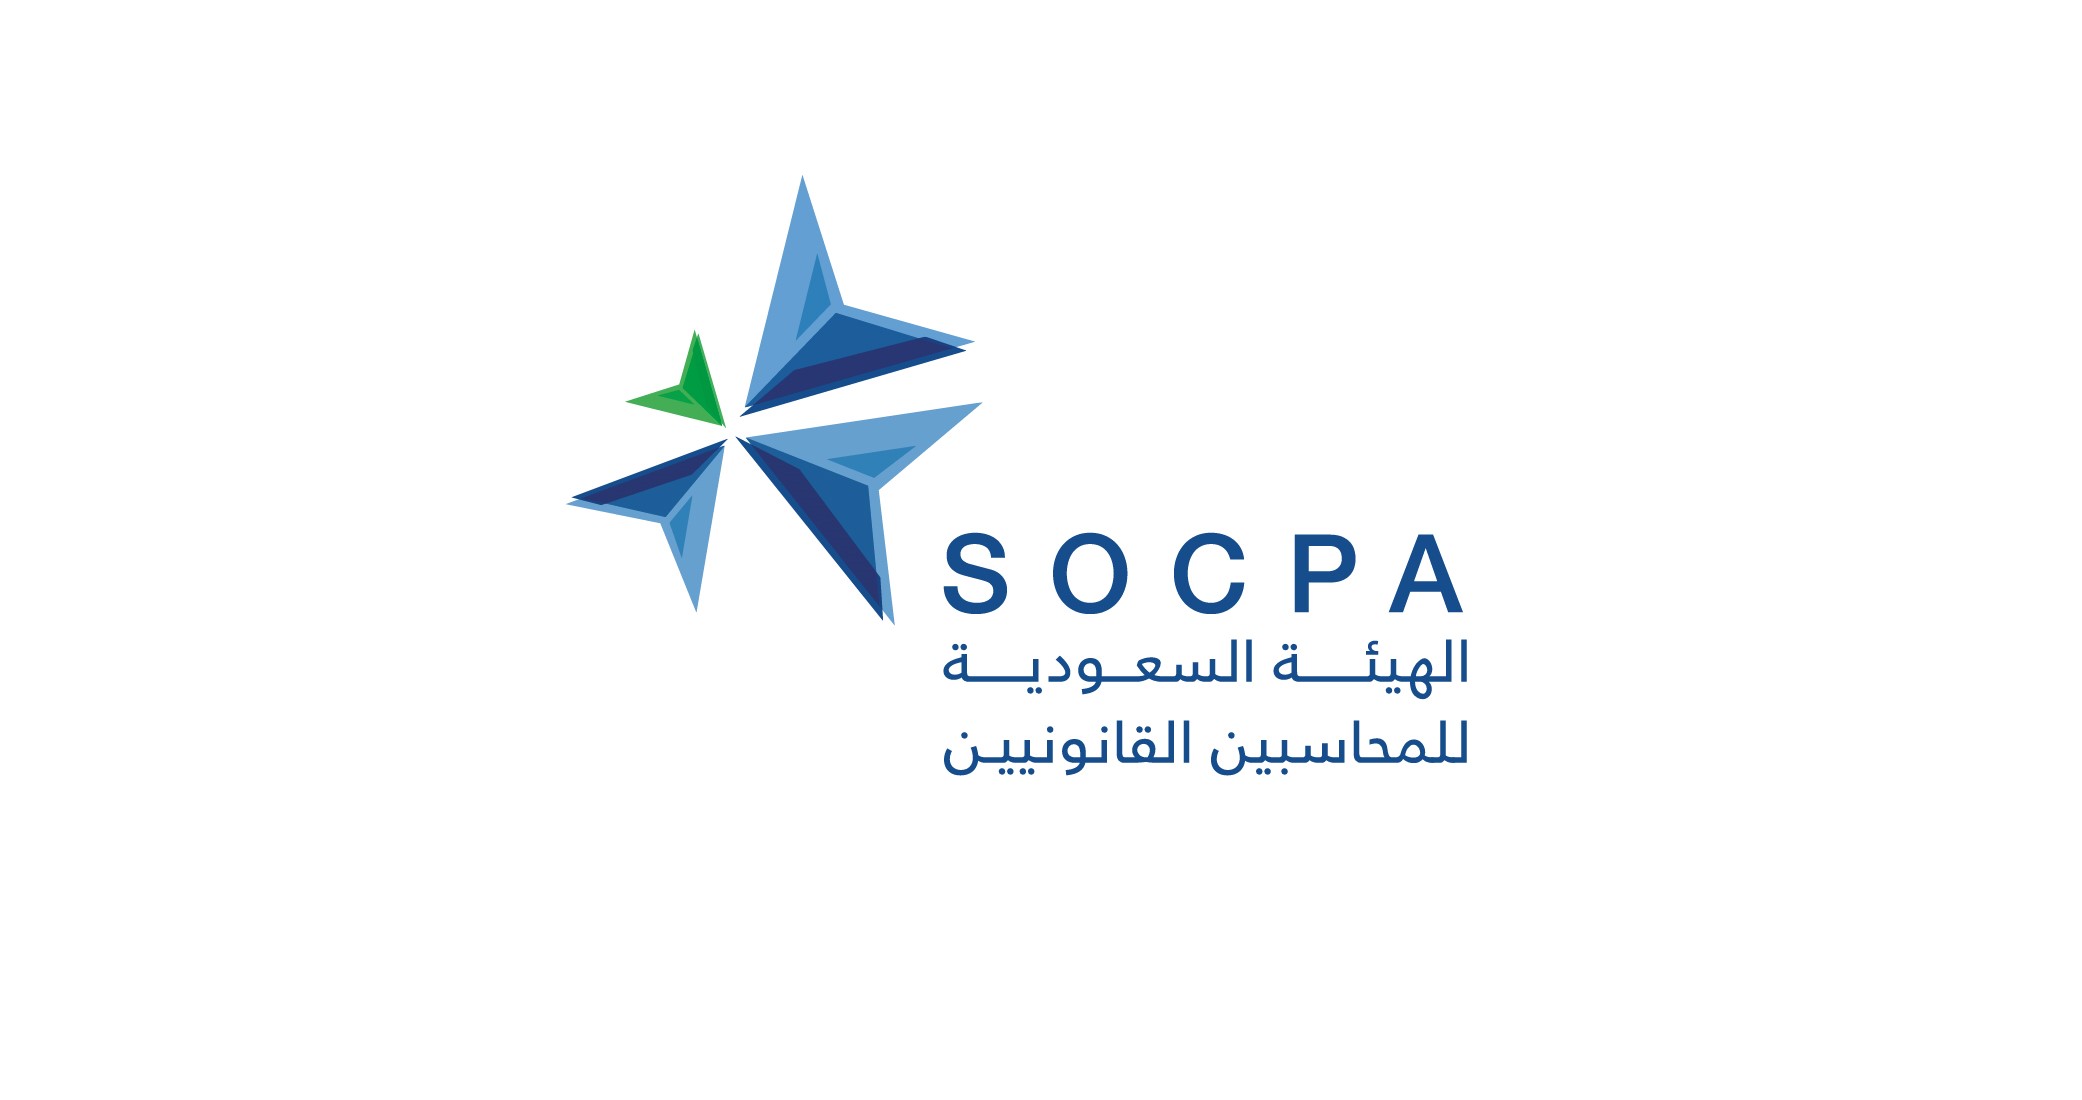 SOCPA expresses its view on the decision of the commission for the interpretation of international standards concerning the transfer of players in clubs